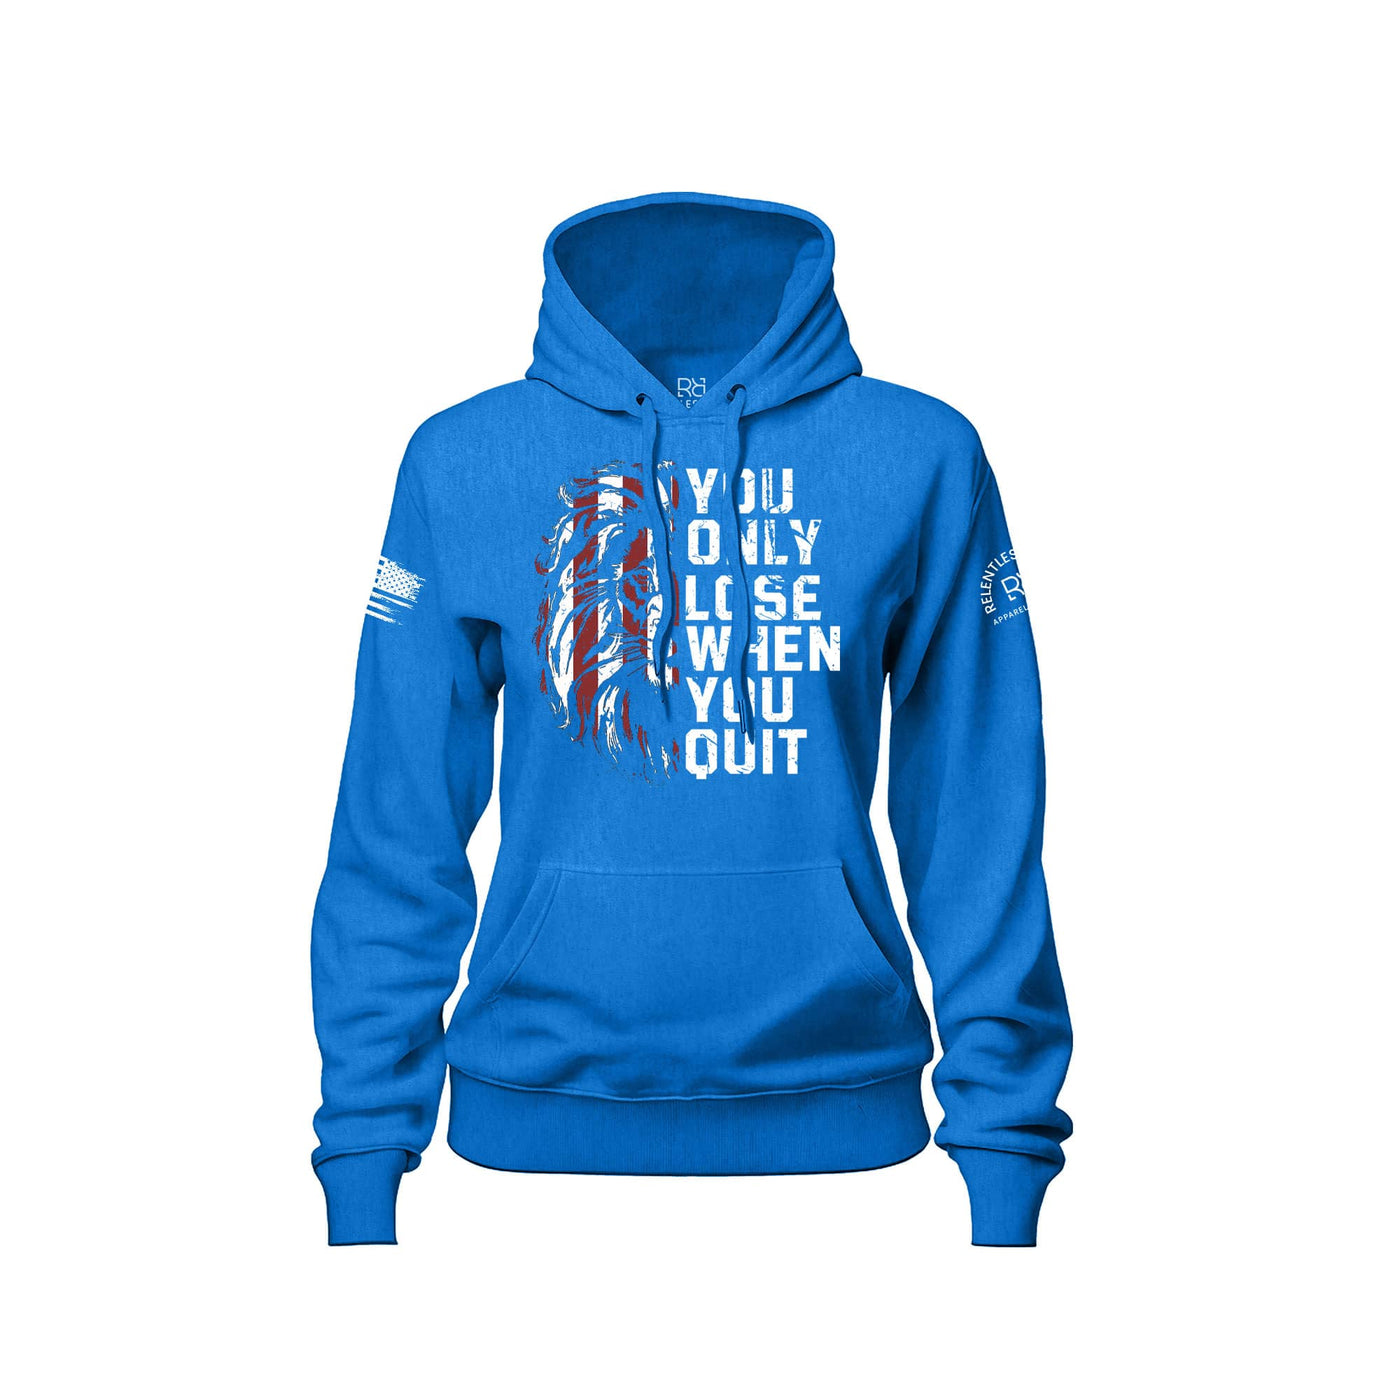 You Only Lose When You Quit | Front | Women's Hoodie